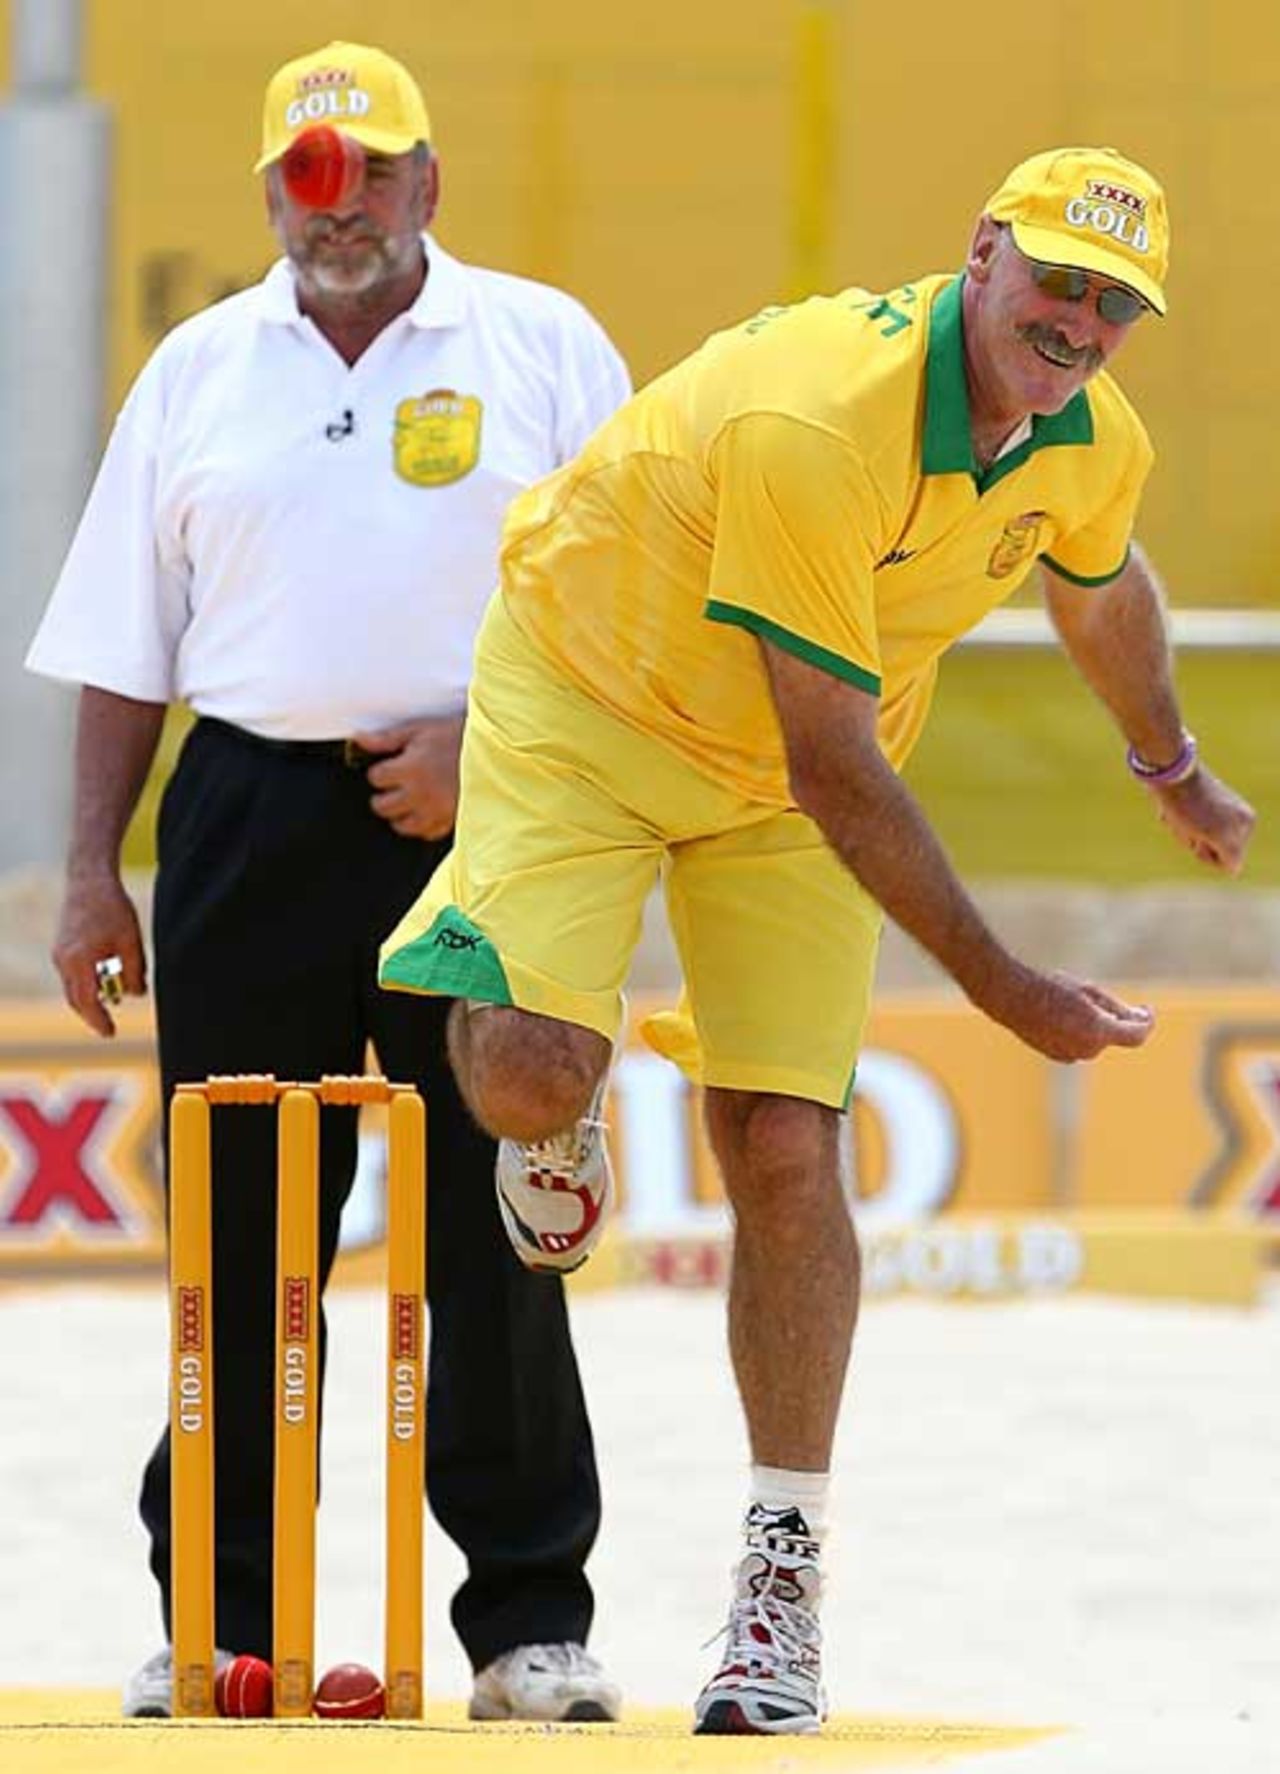 Dennis Lillee in action during the beach cricket tri-series, Scarborough Beach, Perth, January 27, 2007